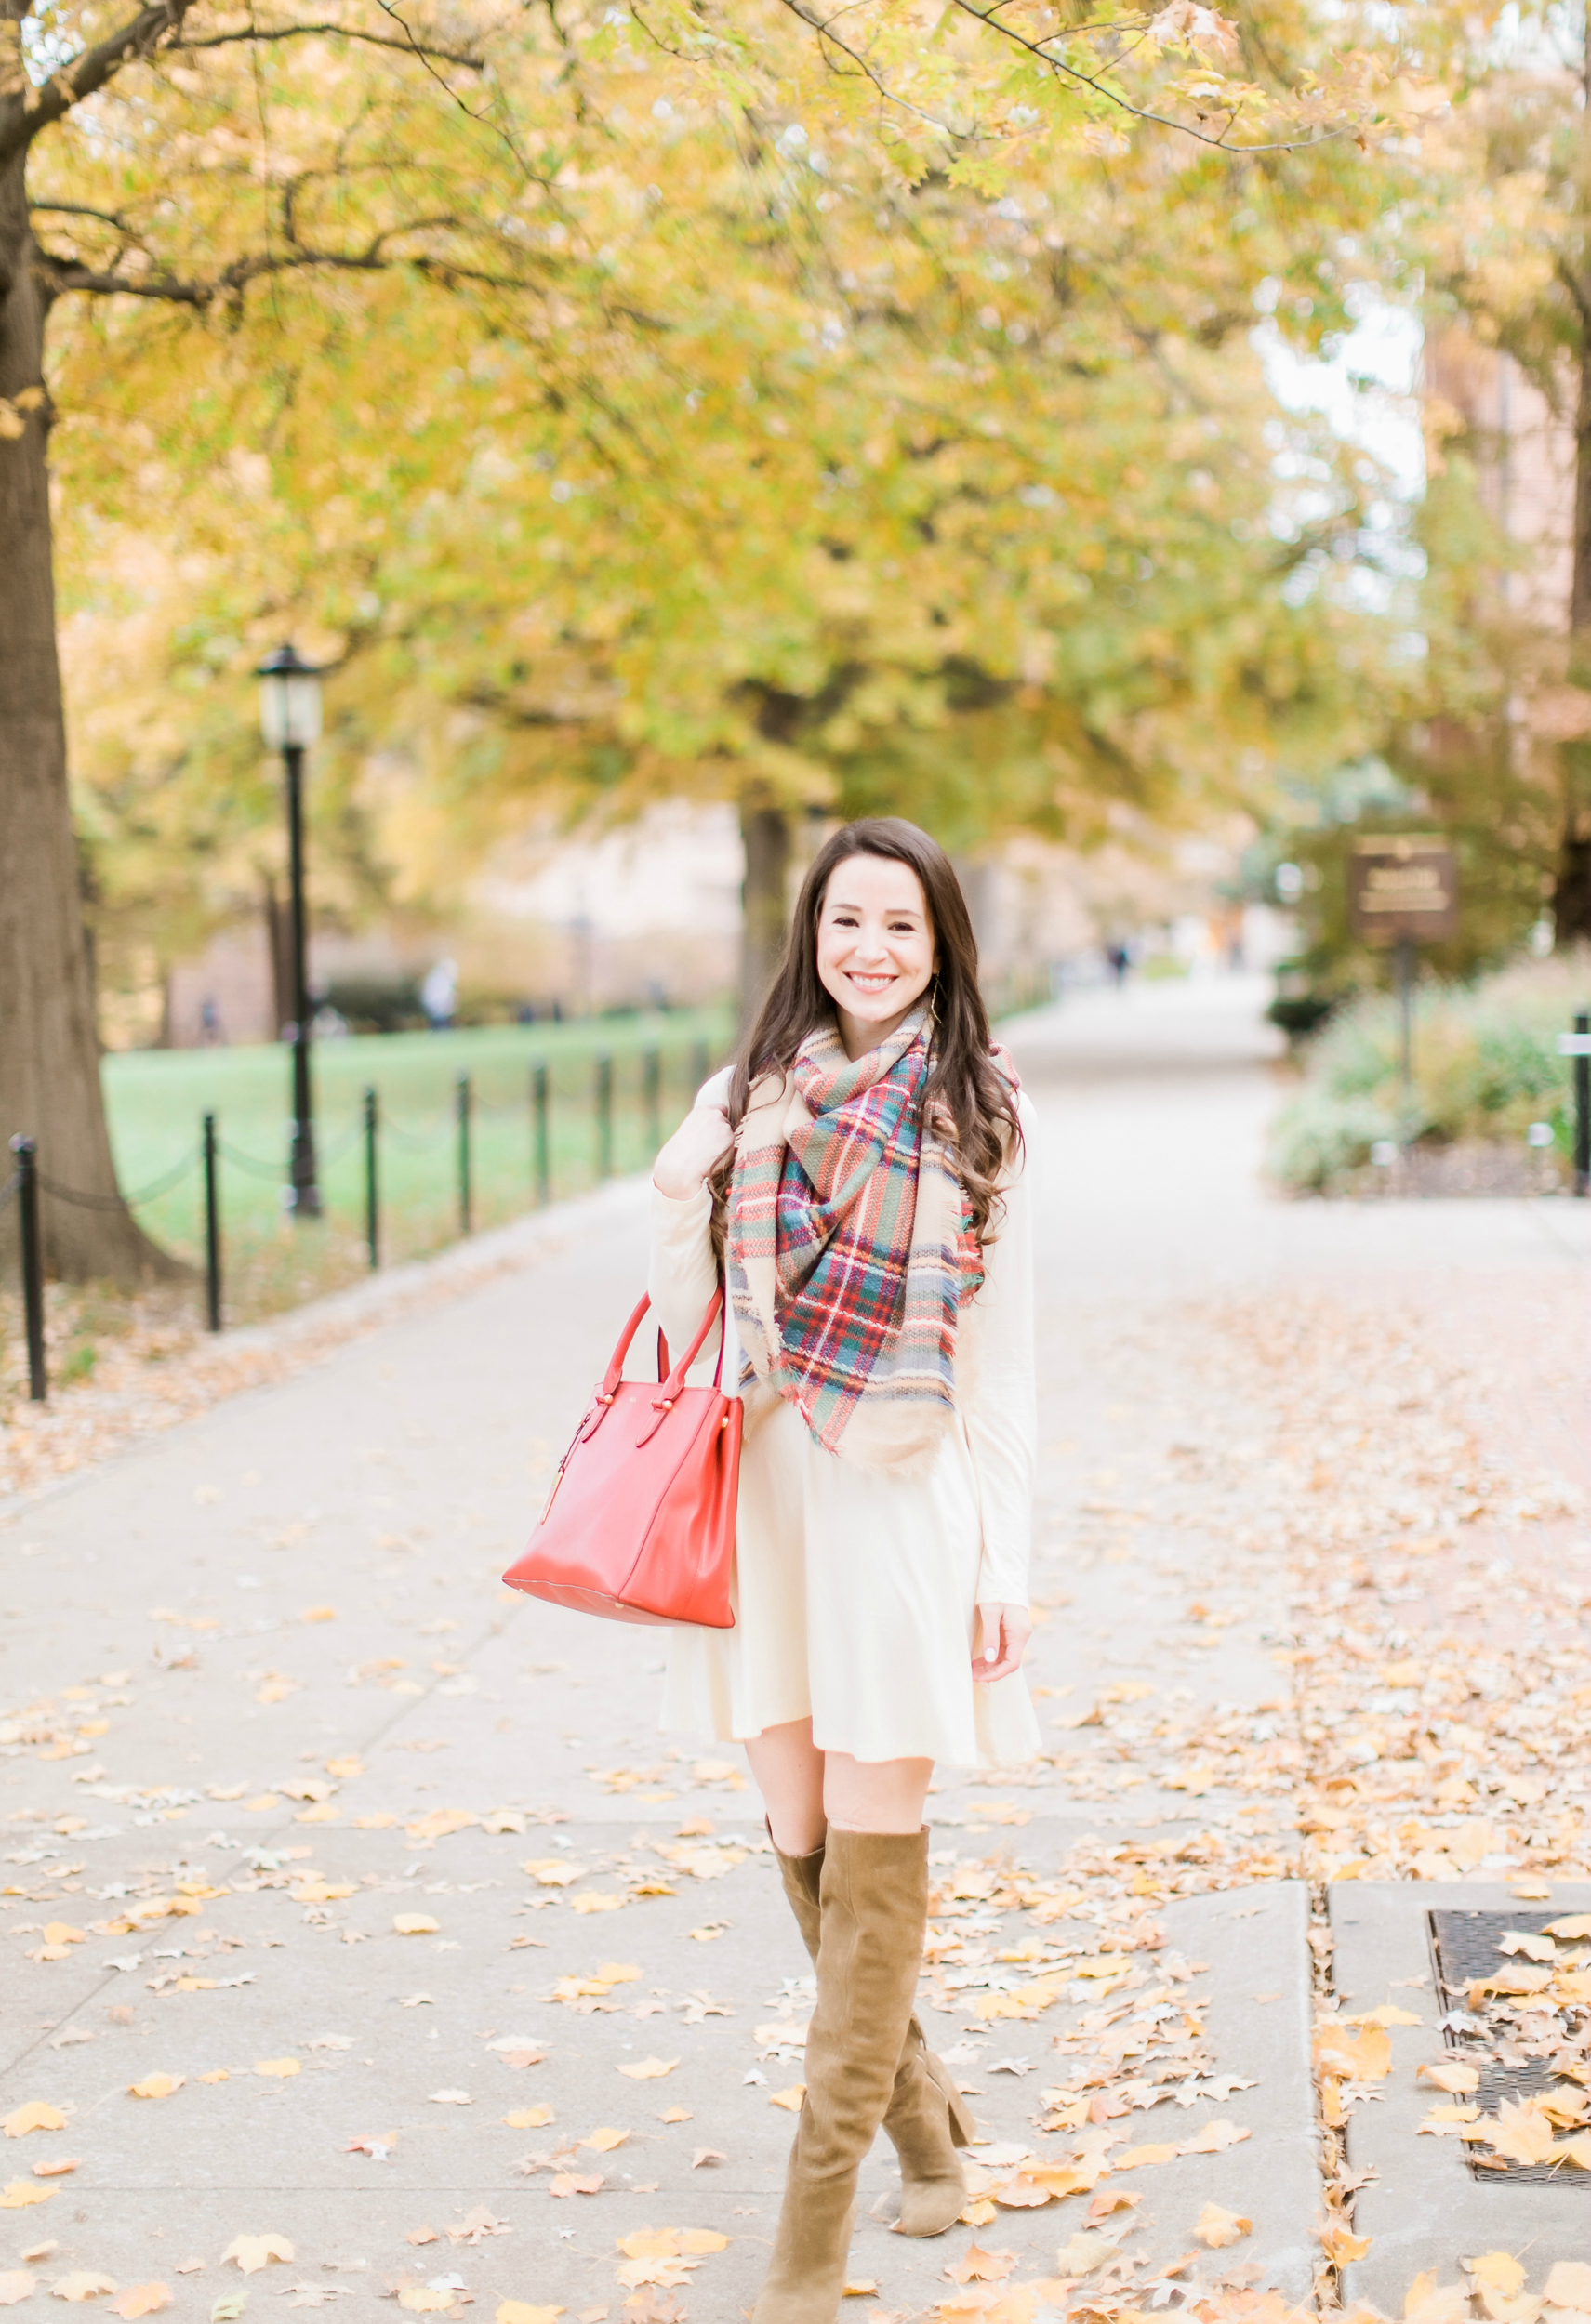 Beige cotton swing dress with tartan blanket scarf, Free People cognac OTK boots, red Ralph Lauren handbag, and Kendra Scott Sophee earrings | Casual holiday outfit idea | 10 tips for looking your best on camera | Tips for Looking Your Best in Holiday Photos from fashion blogger Stephanie Ziajka of Diary of a Debutante